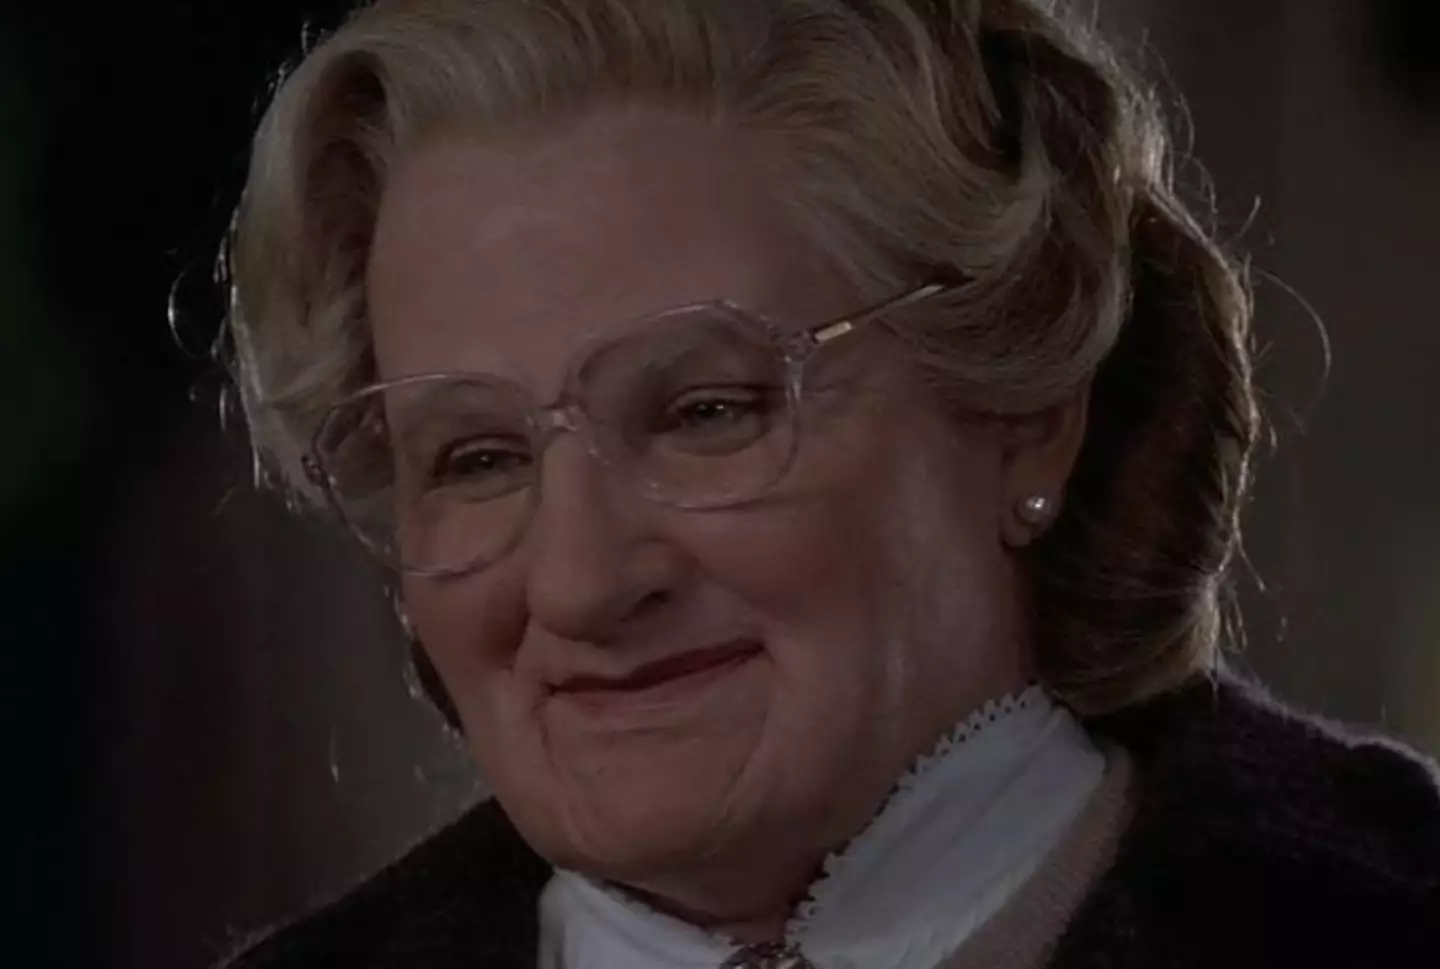 The late Robin Williams played the iconic role of Mrs Doubtfire.